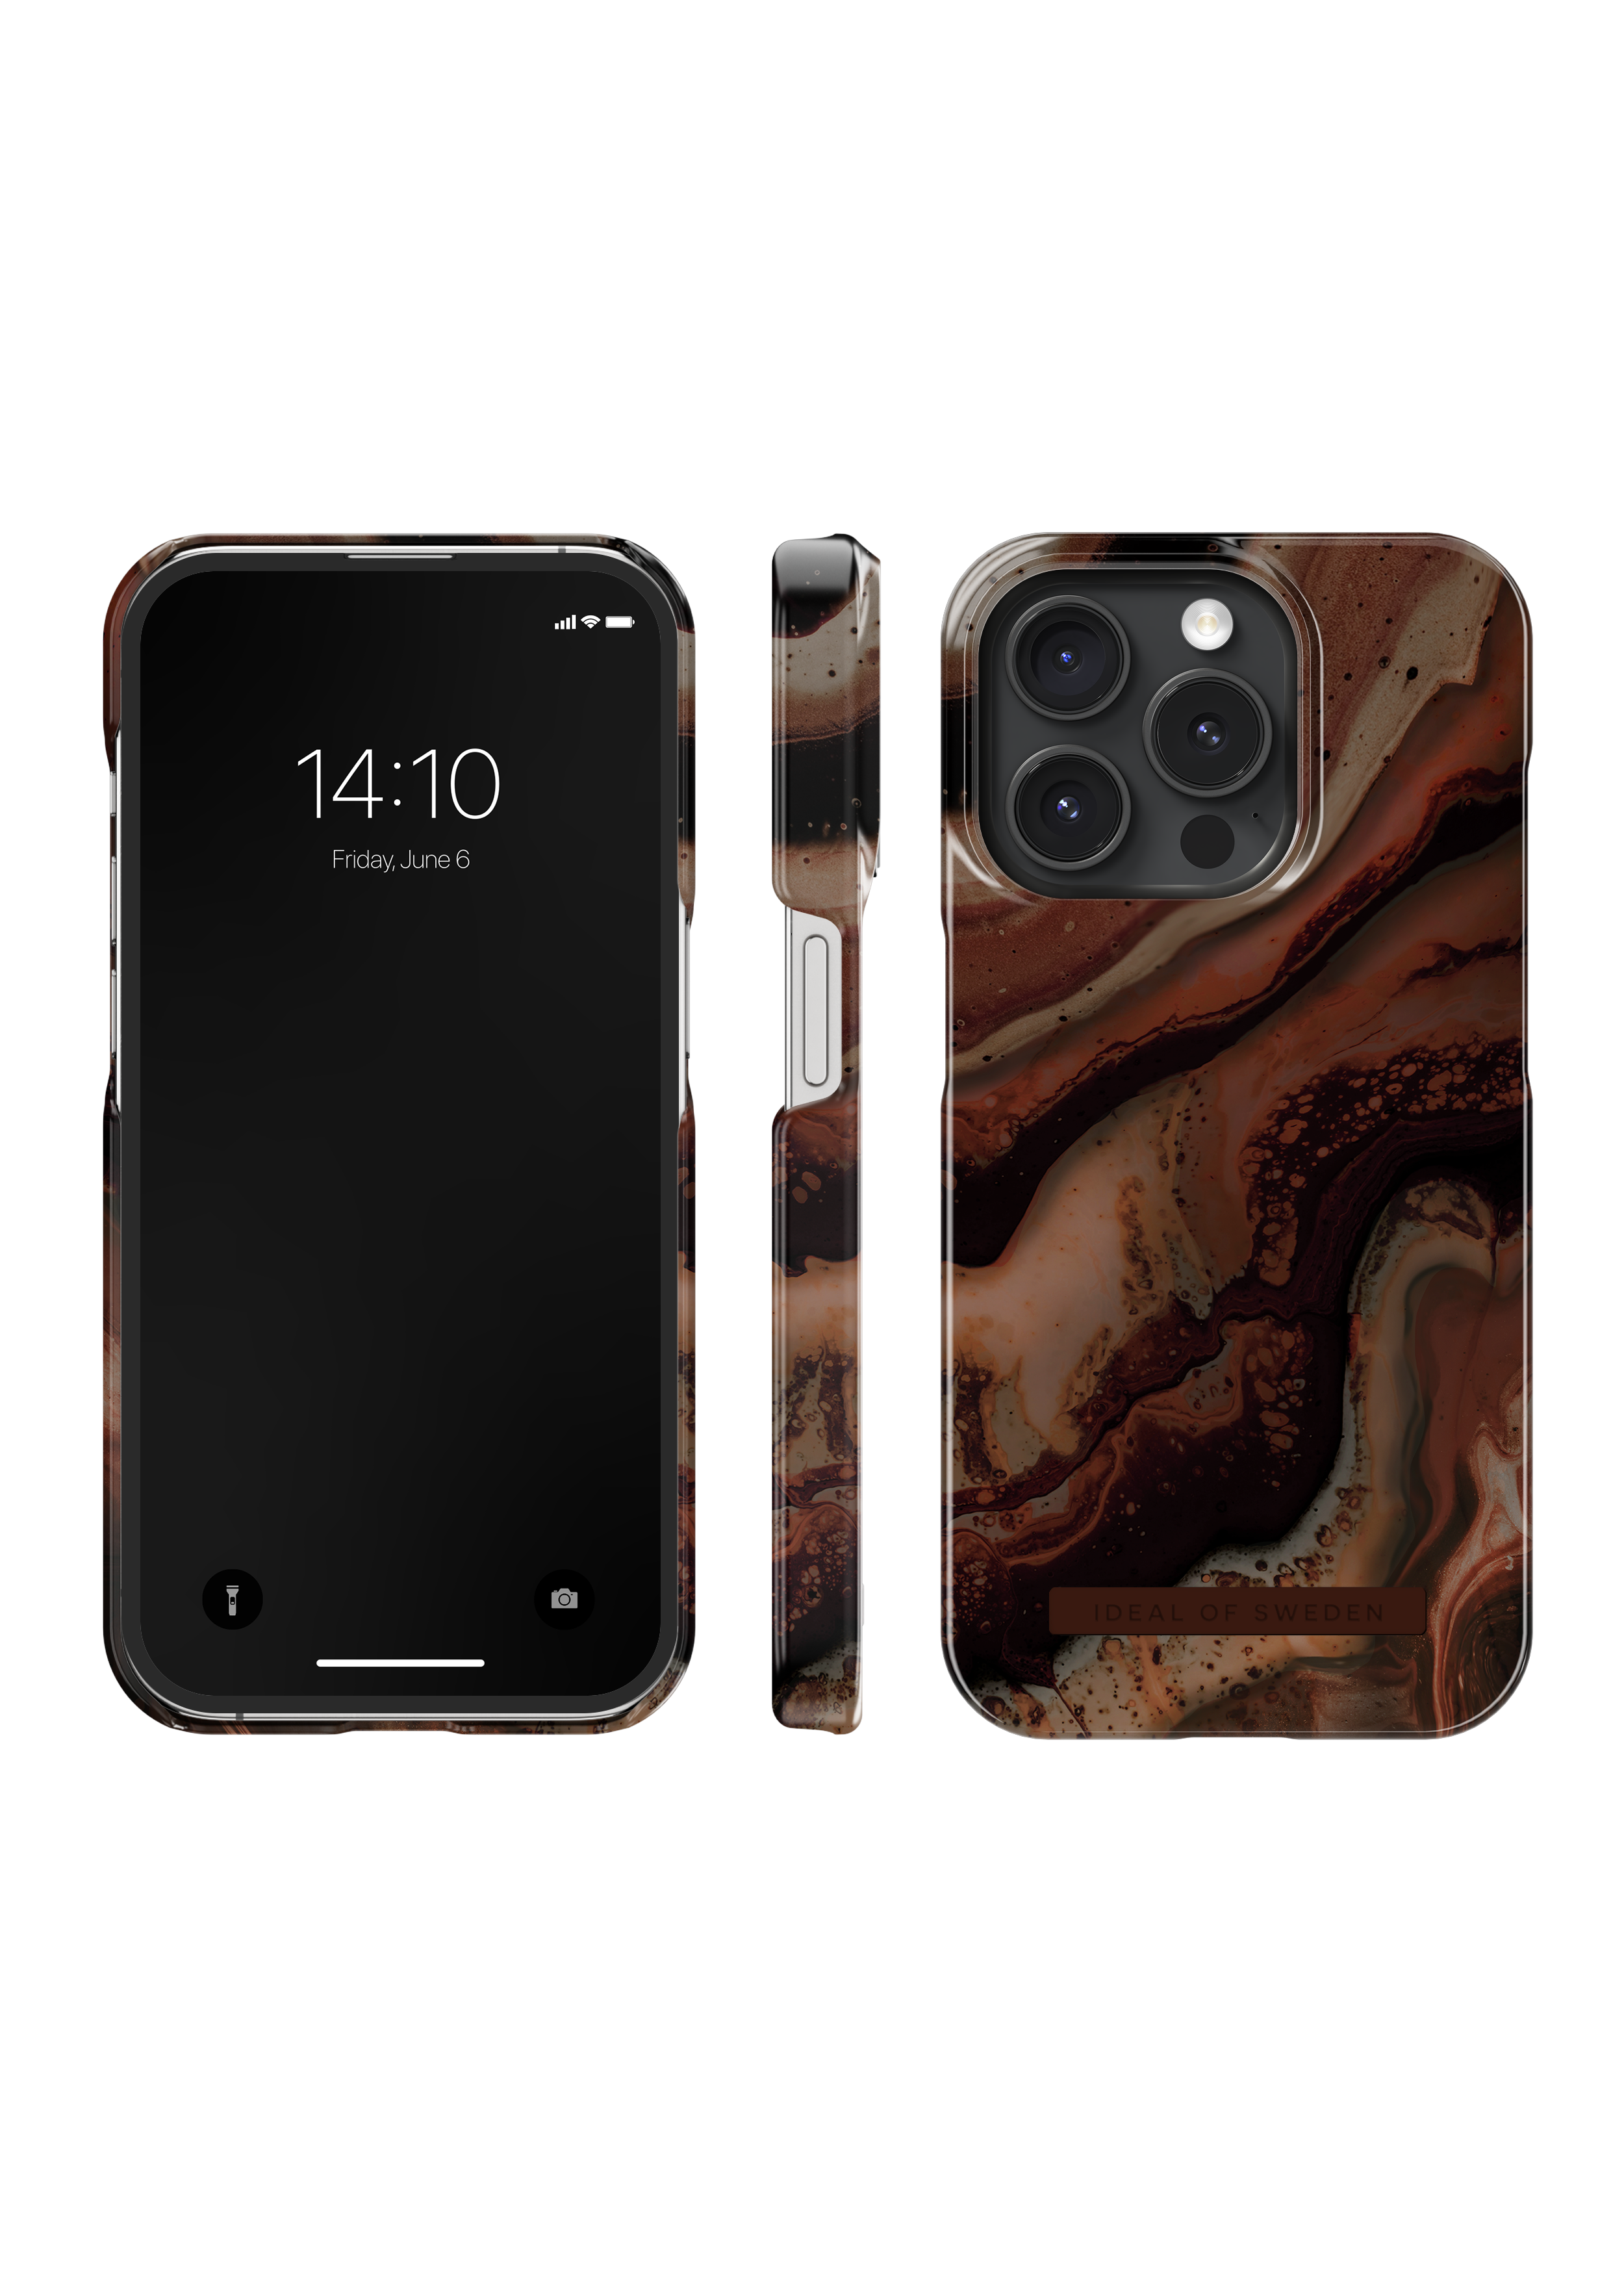 Fashion Cover iPhone 15 Pro Dark Amber Marble